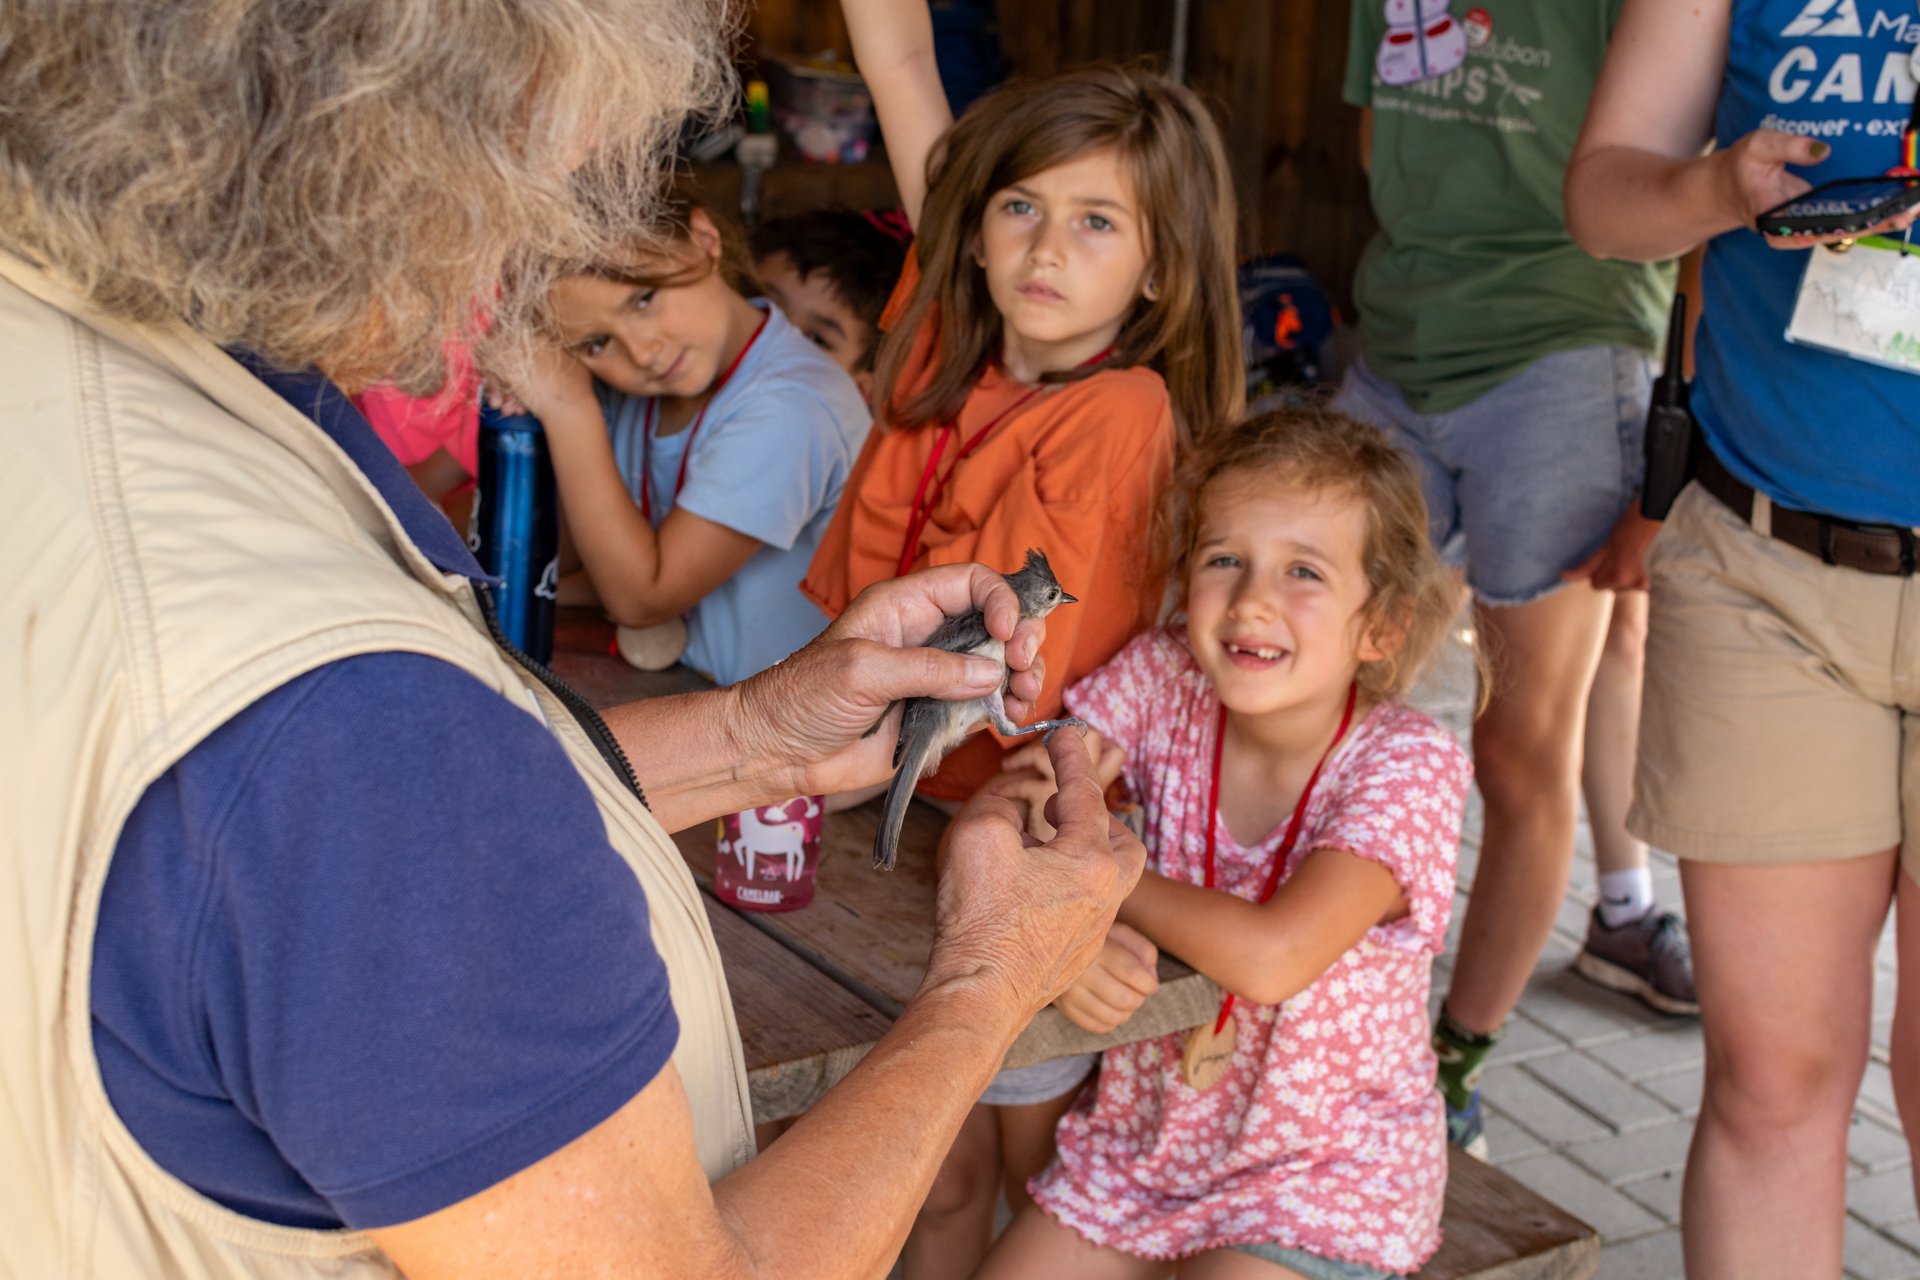 Broadmoor campers and counselors watch as educator Elissa Landre shows them a Tufted Titmouse she is holding that is ready to be banded. One camper is smiling with missing front teeth and another has her hand raised to ask a question.